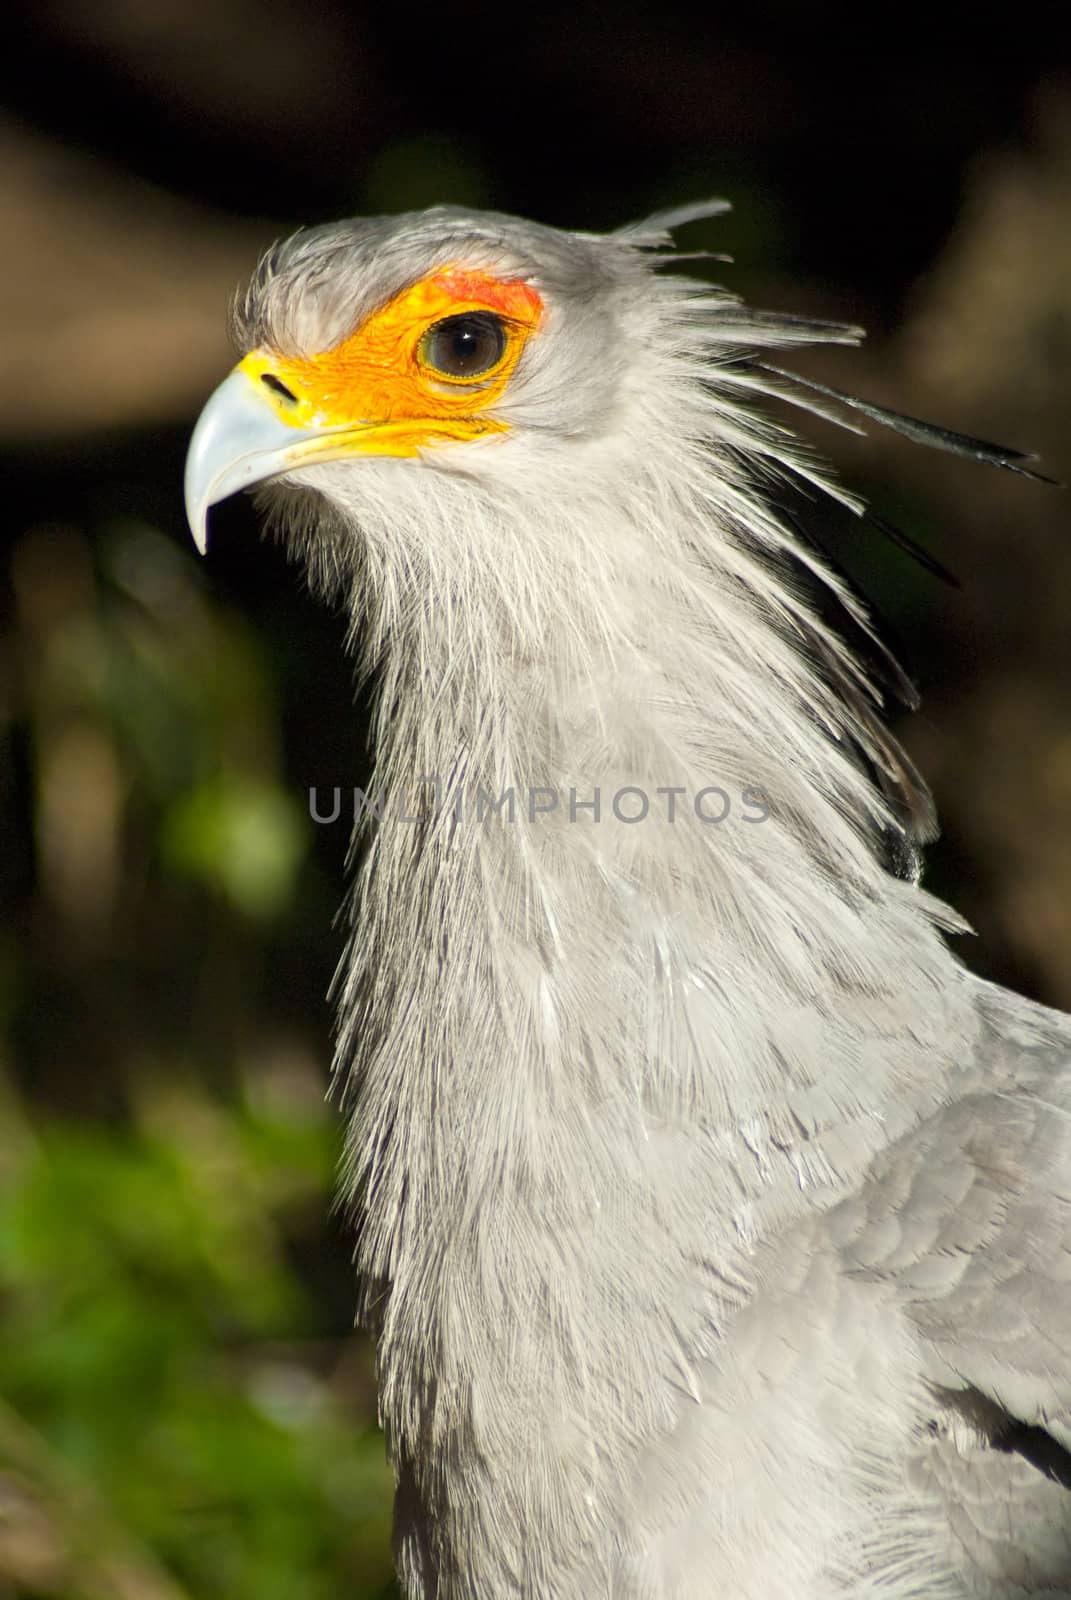 White bird with orange around its eyes and exotic feathers around its head